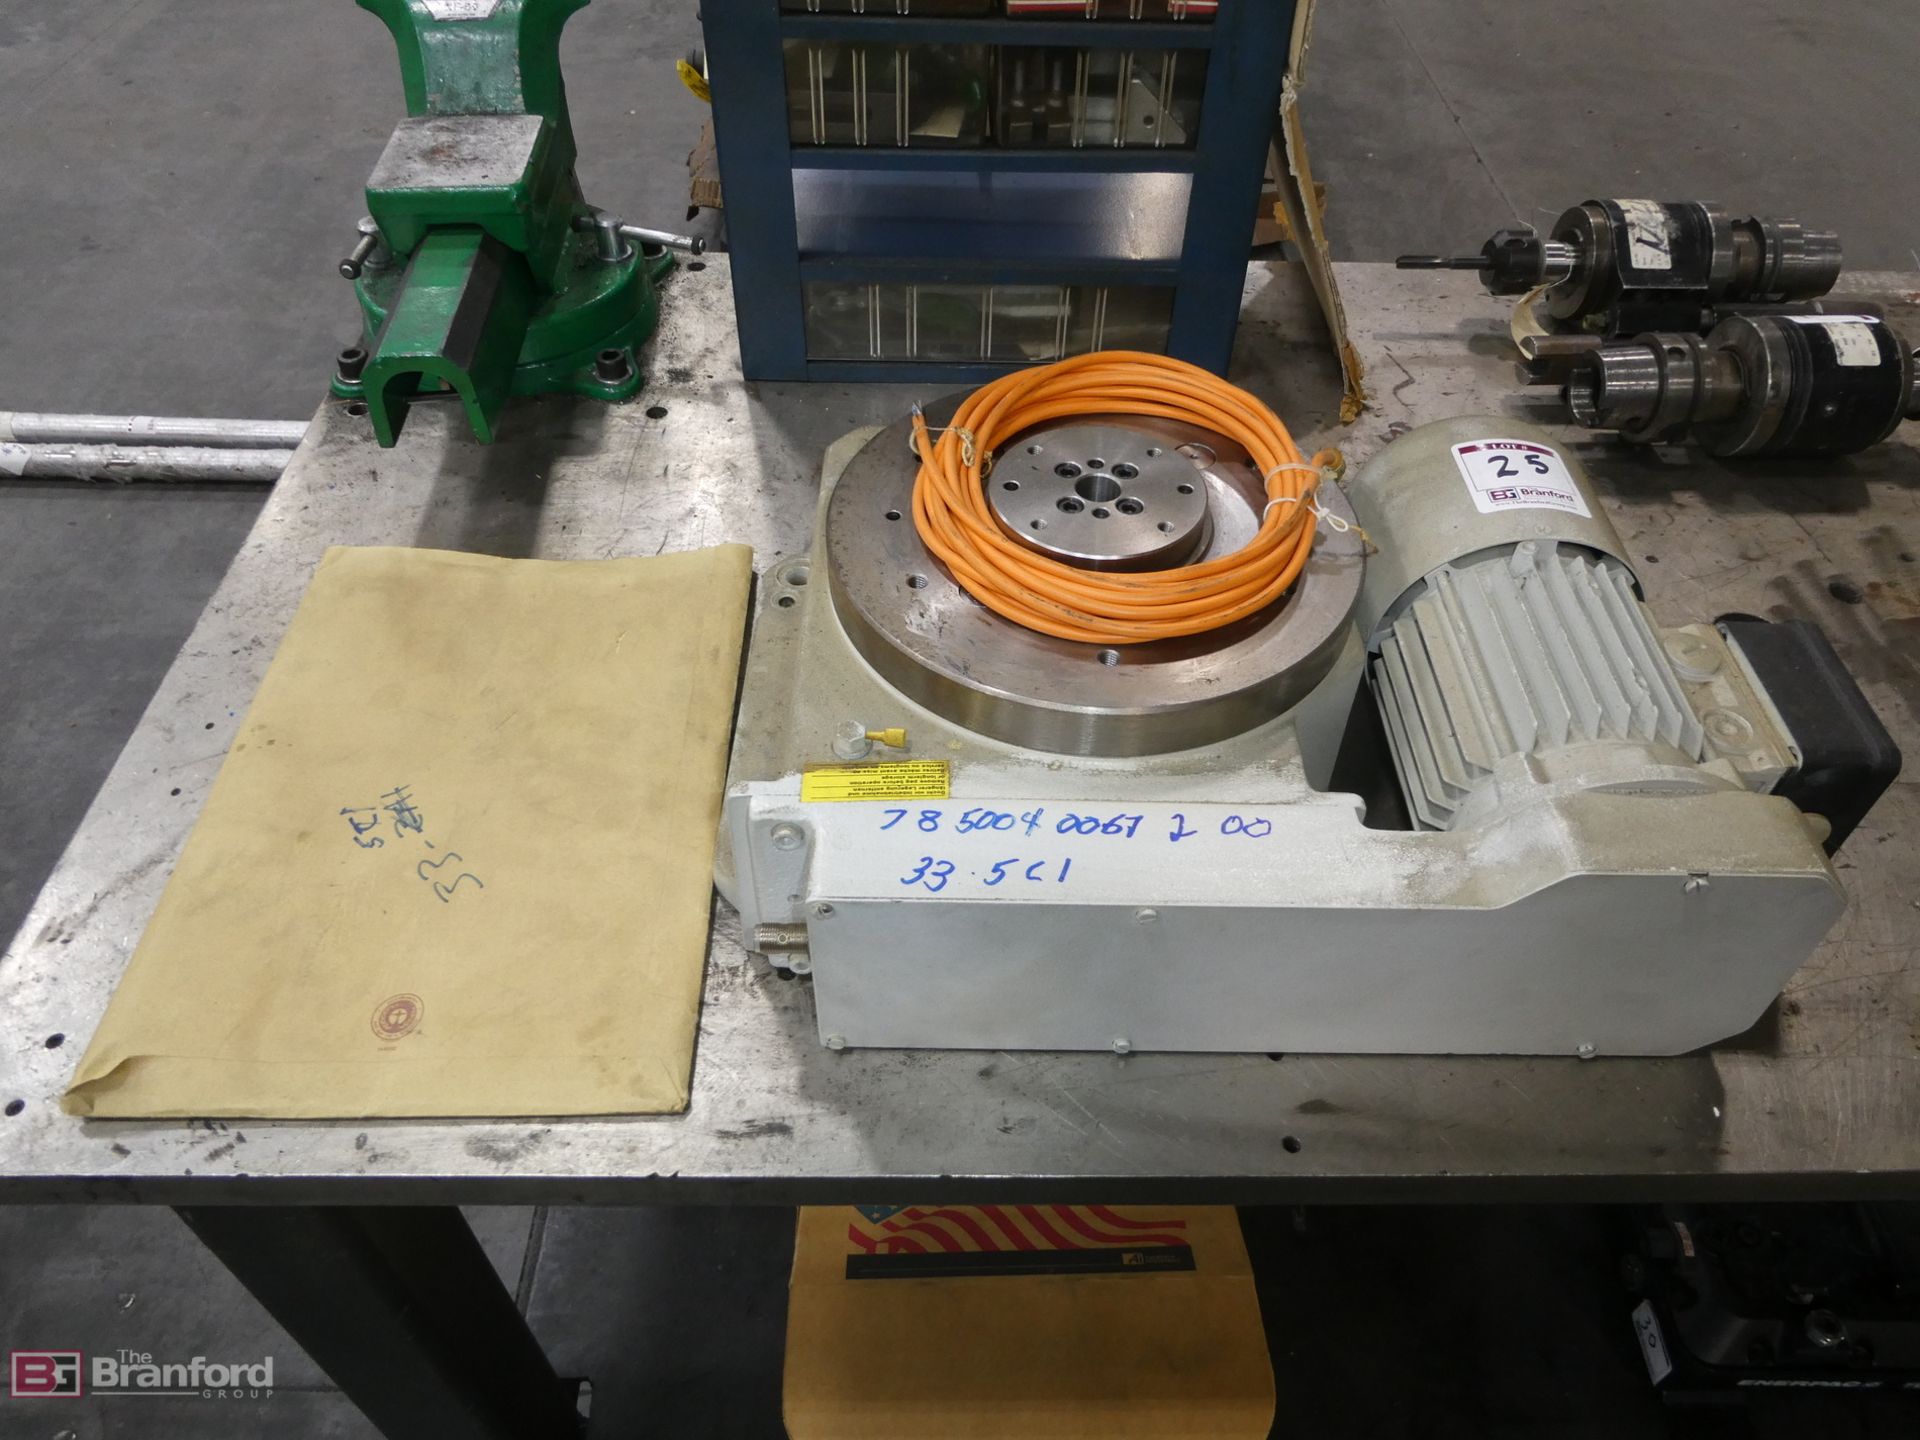 Weiss Gmbh Model JC220-03, Motor Driven Rotary Indexing Table